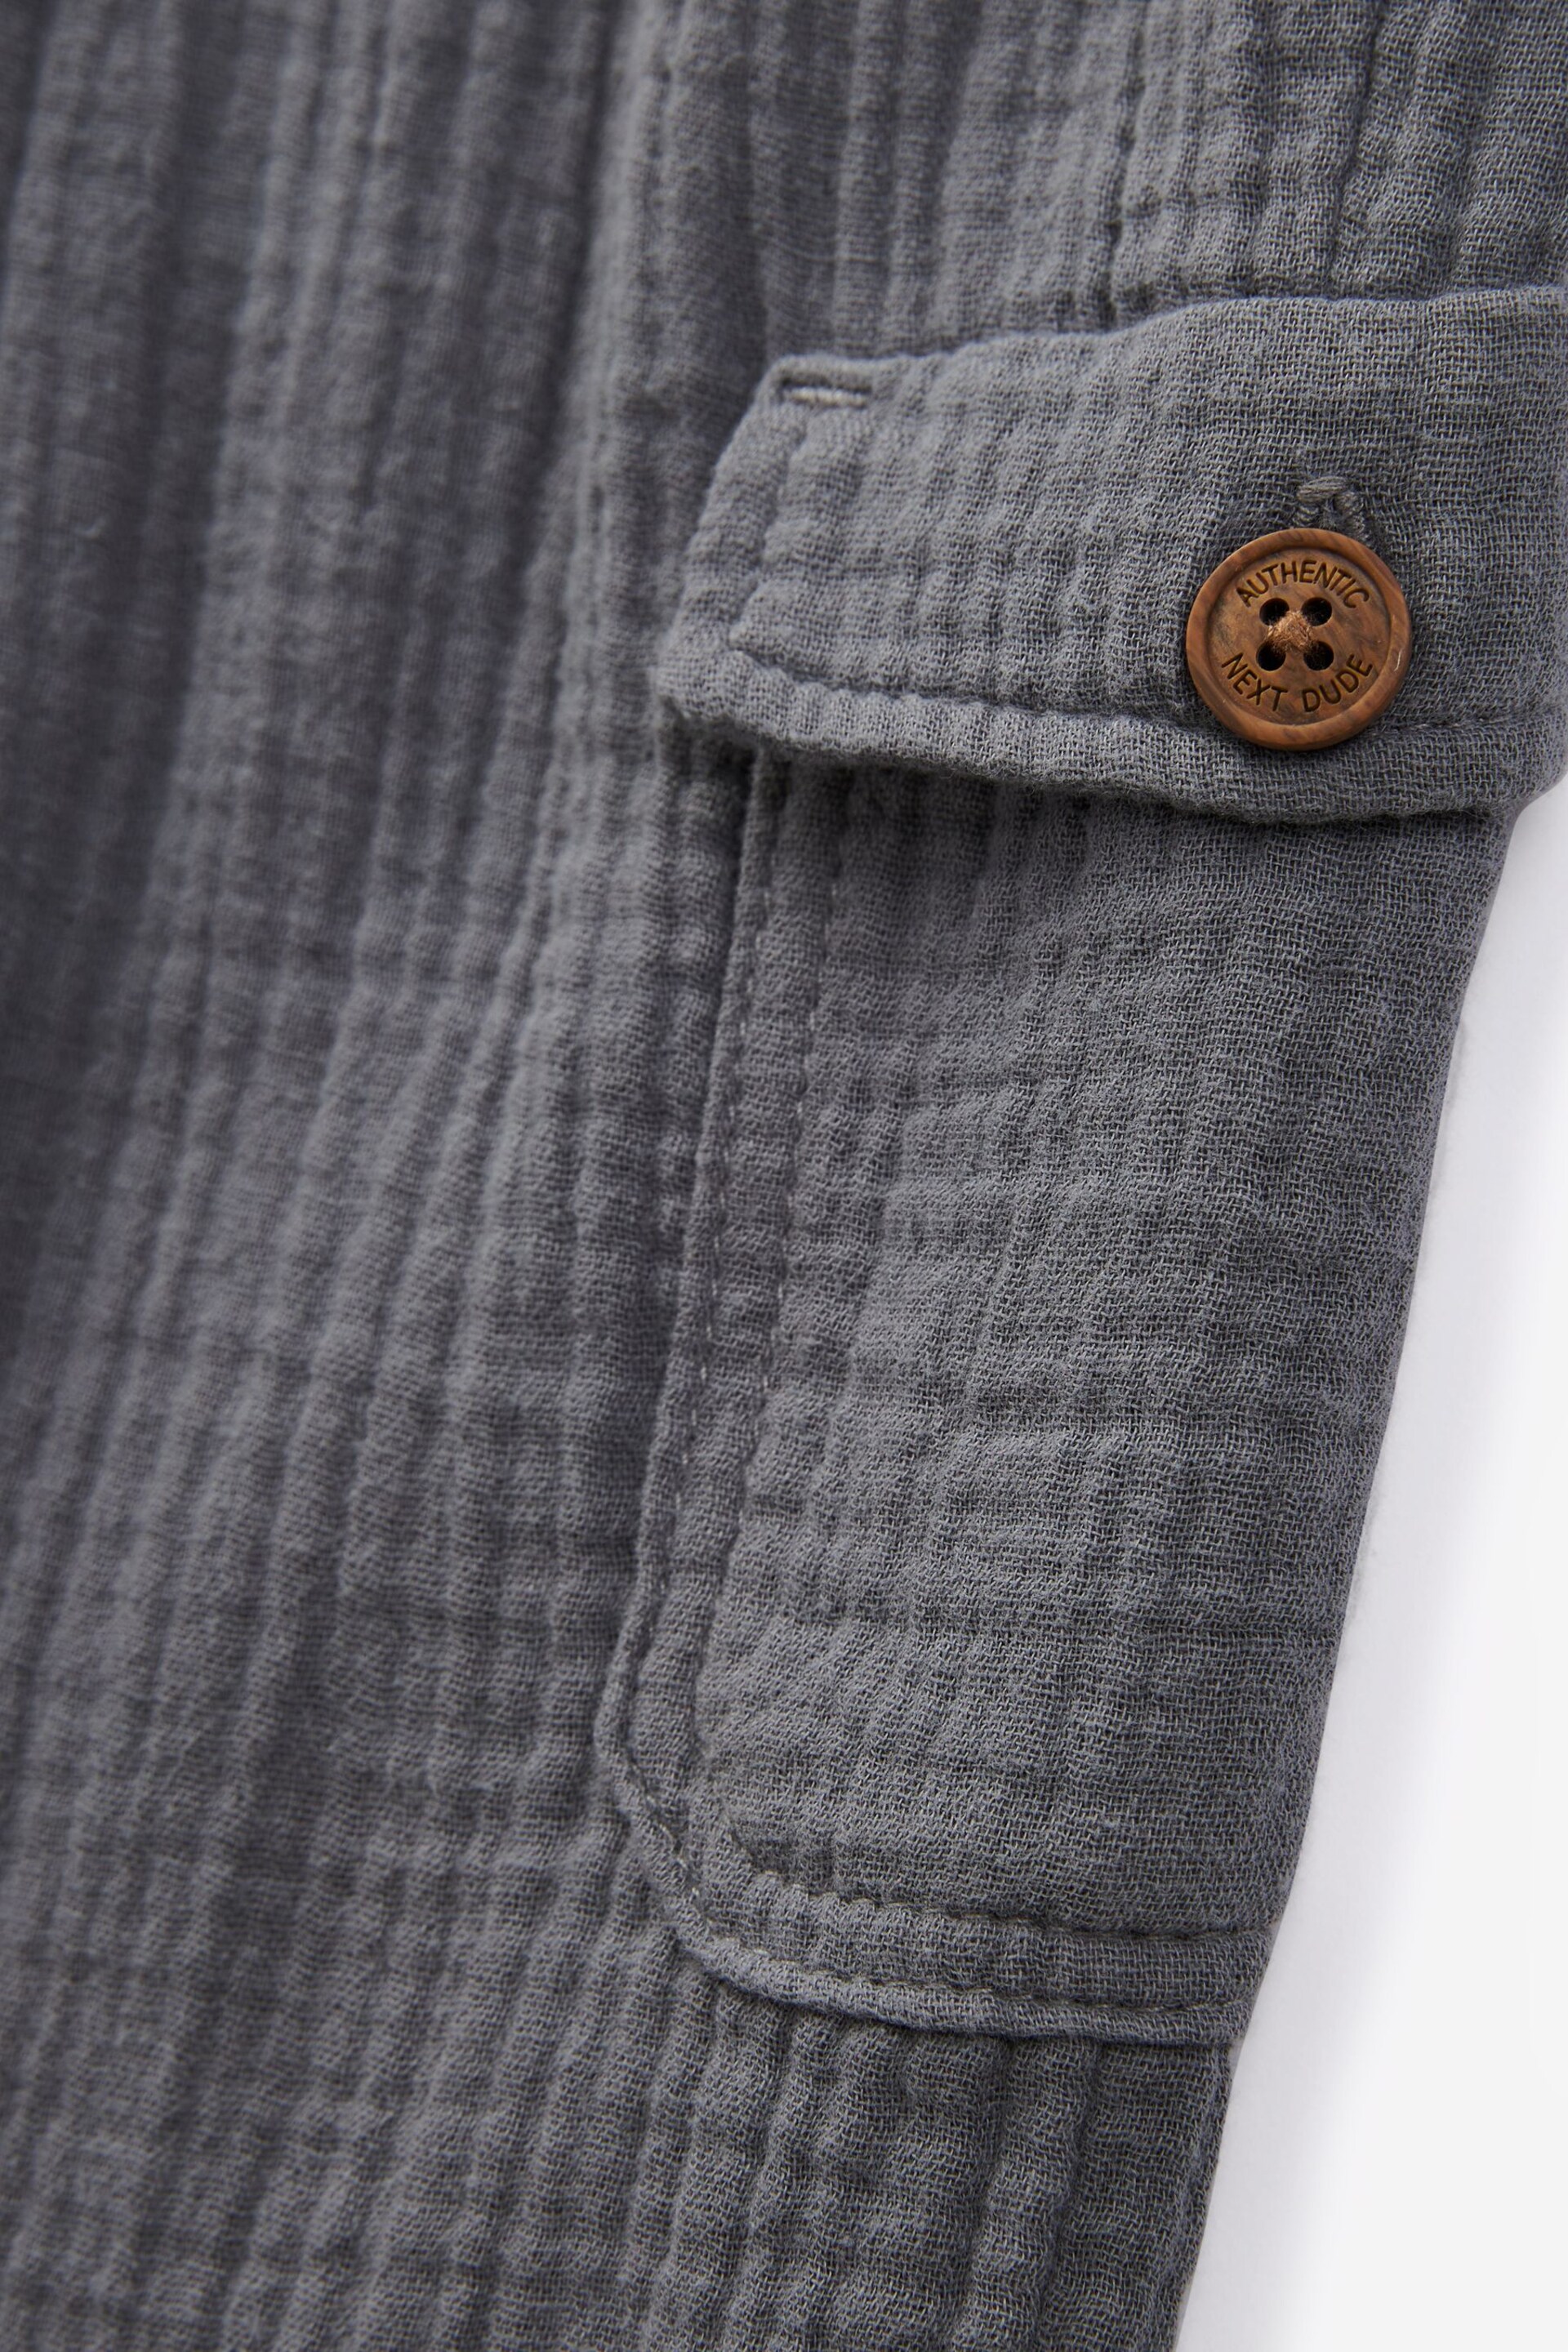 Grey Soft Textured Lined Cotton Trousers (3mths-7yrs) - Image 7 of 7